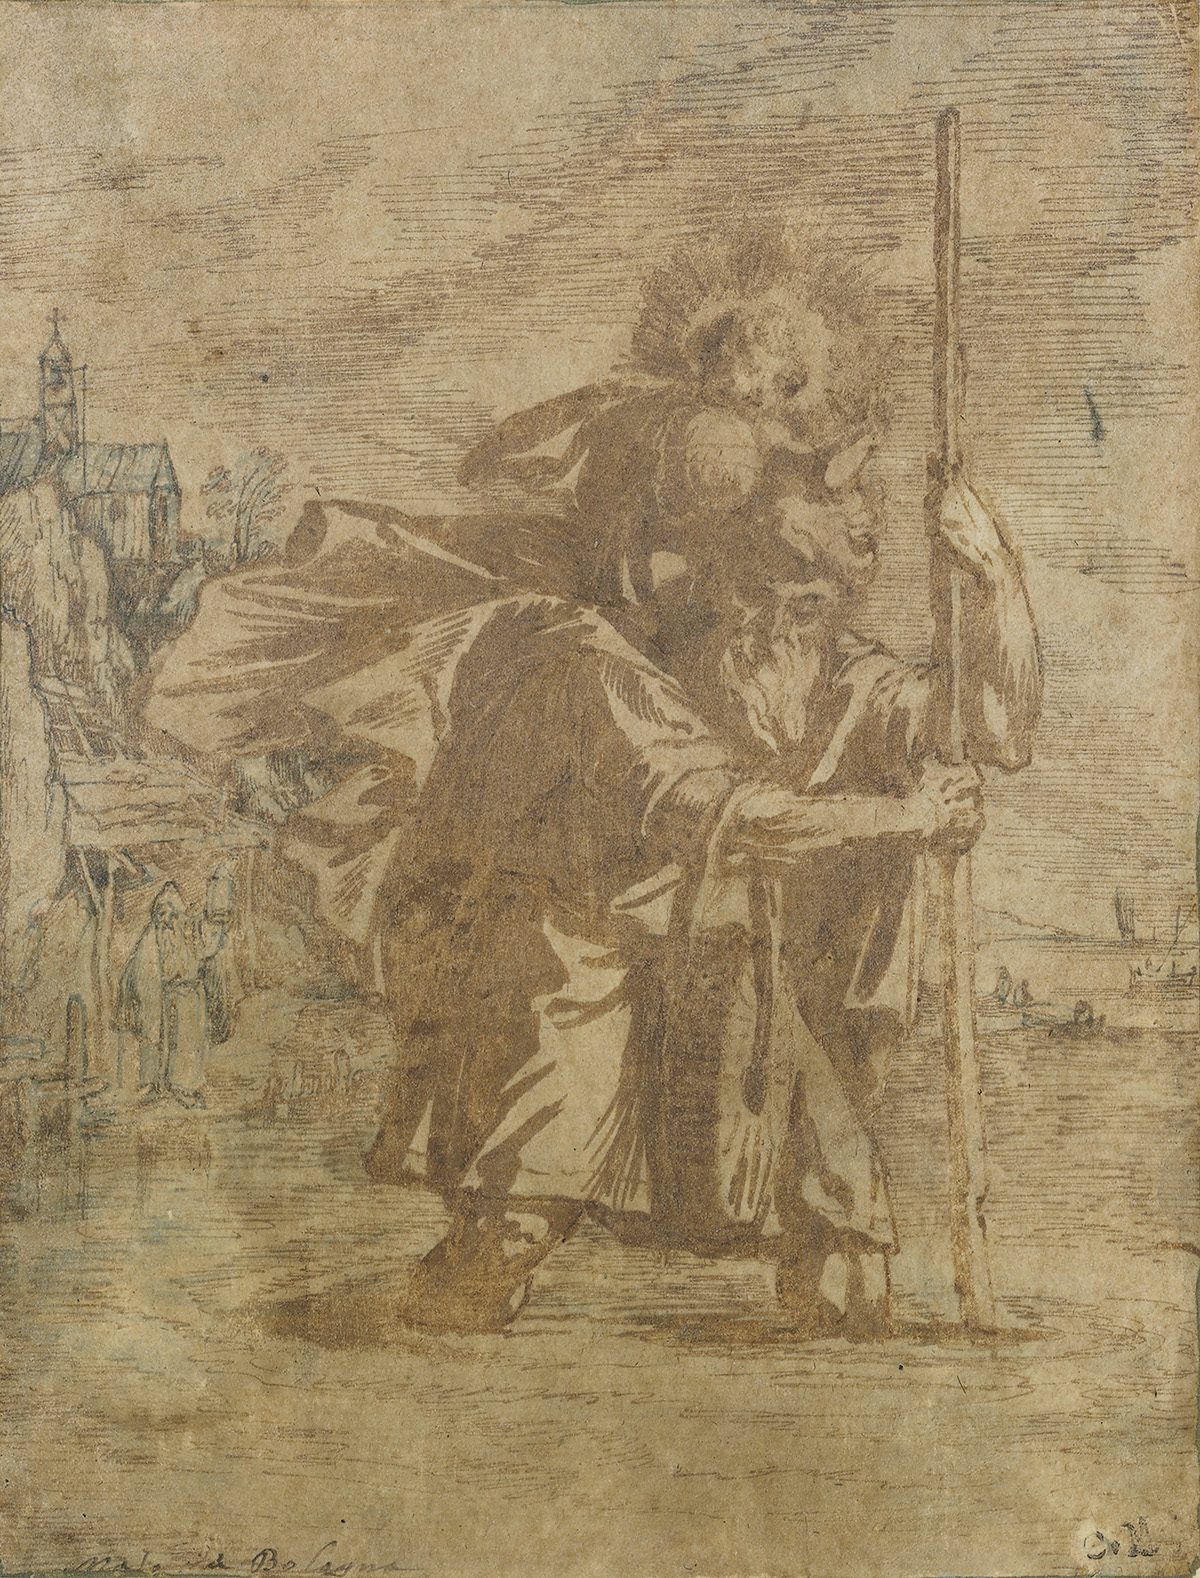 BOLOGNESE SCHOOL, 17TH CENTURY Saint Christopher Carrying the Christ Child.